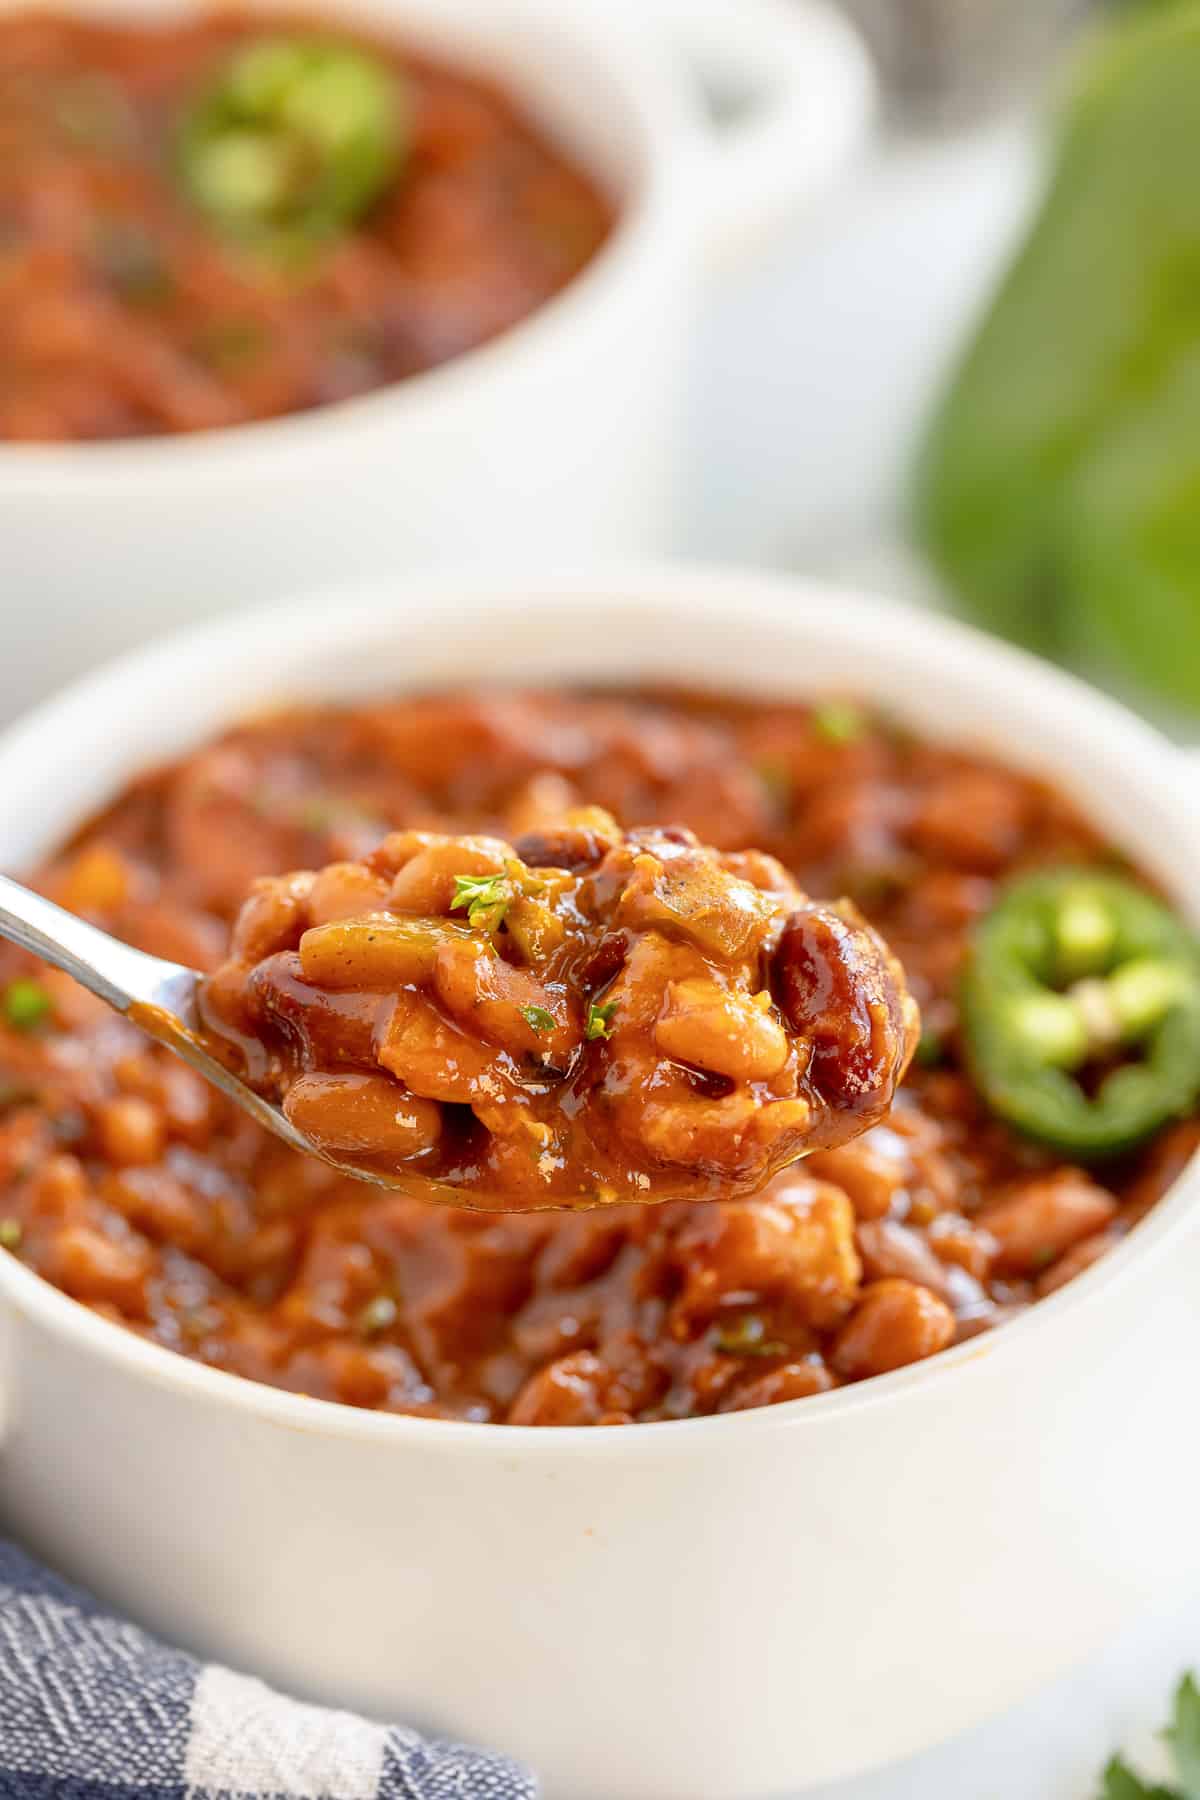 A spoon lifts spicy baked beans from a white bowl.